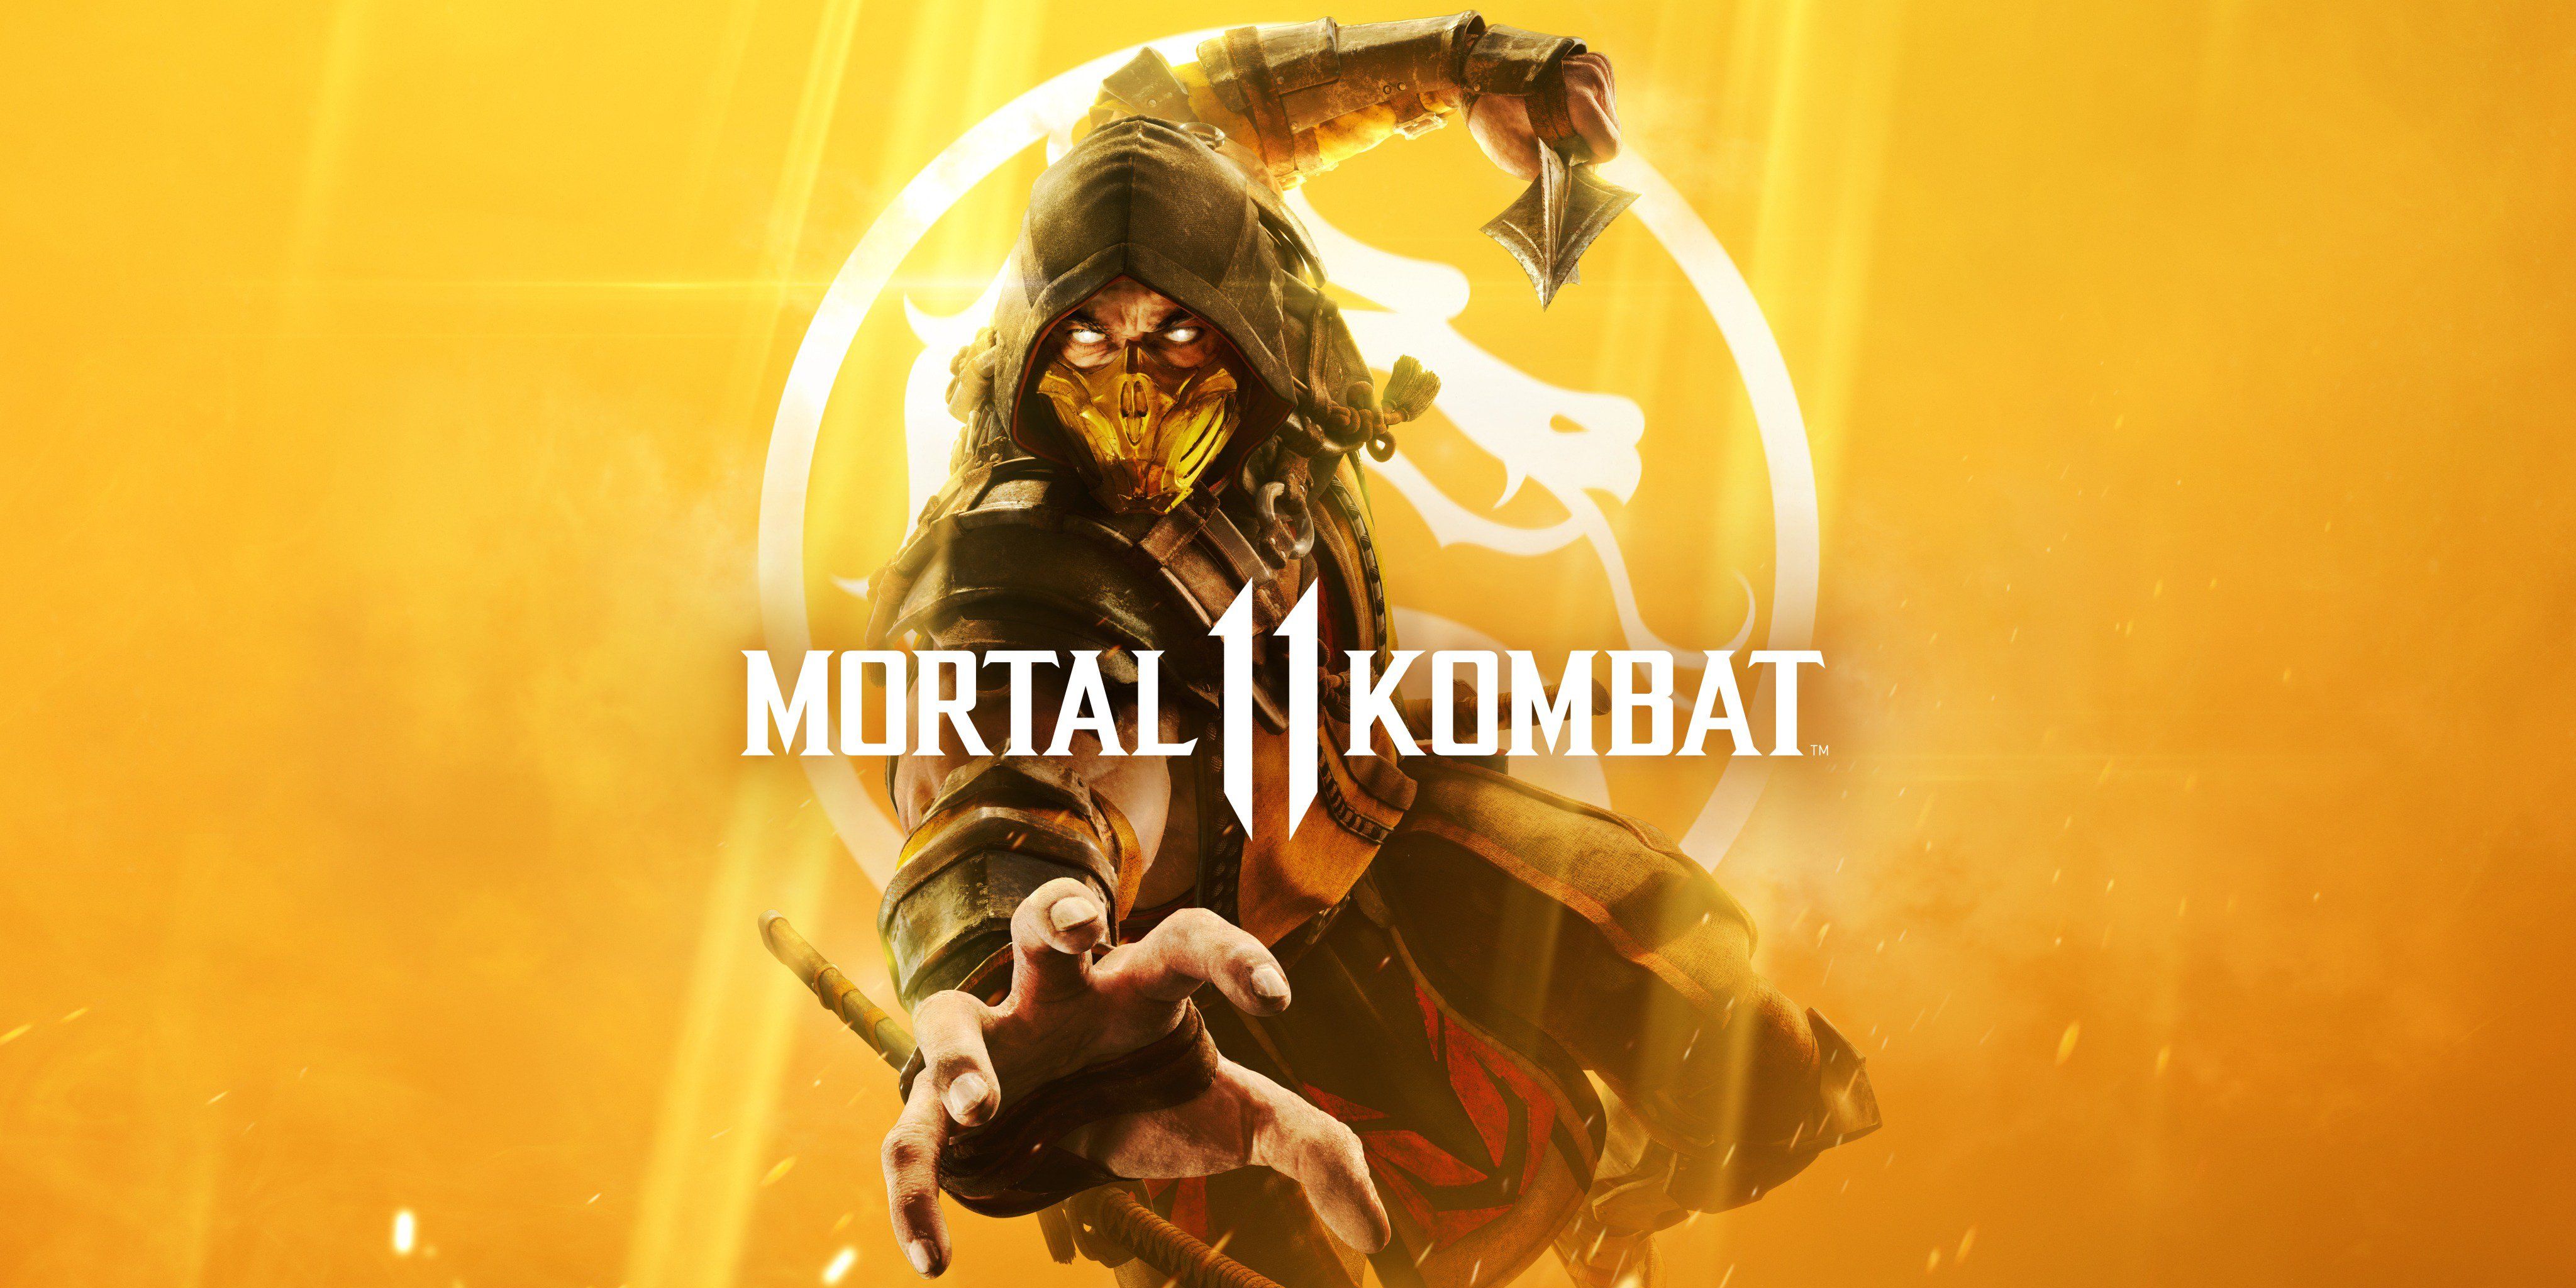 Mortal Kombat fighter Scorpion stands on a yellow background behind the logo.